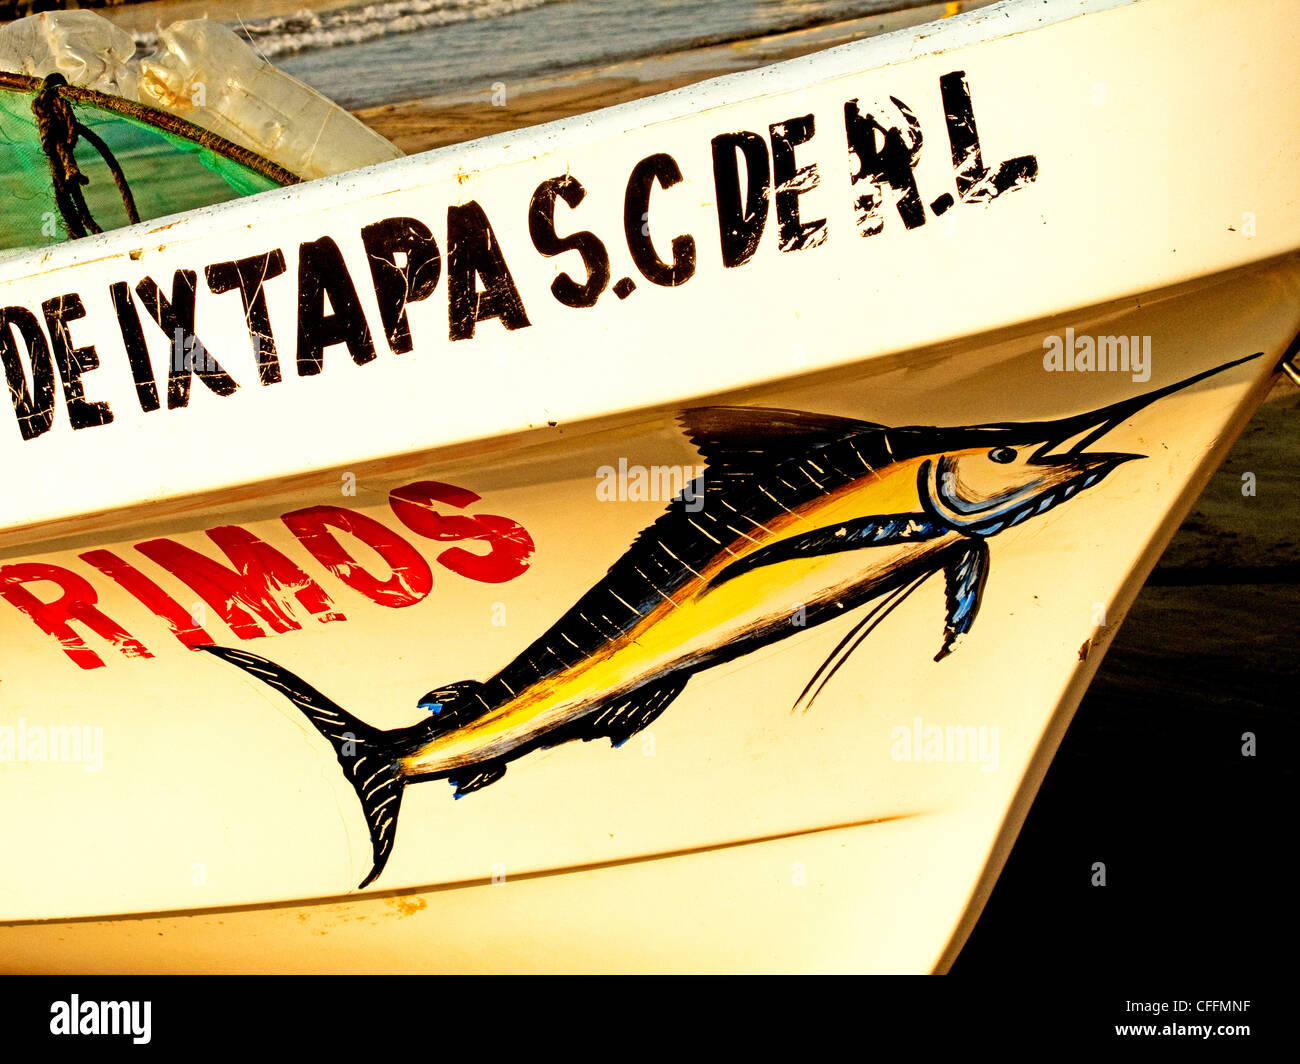 Detail of a fishing boat with a swordfish painted on it on Meliá Azul beach in Ixtapa, Mexico Stock Photo